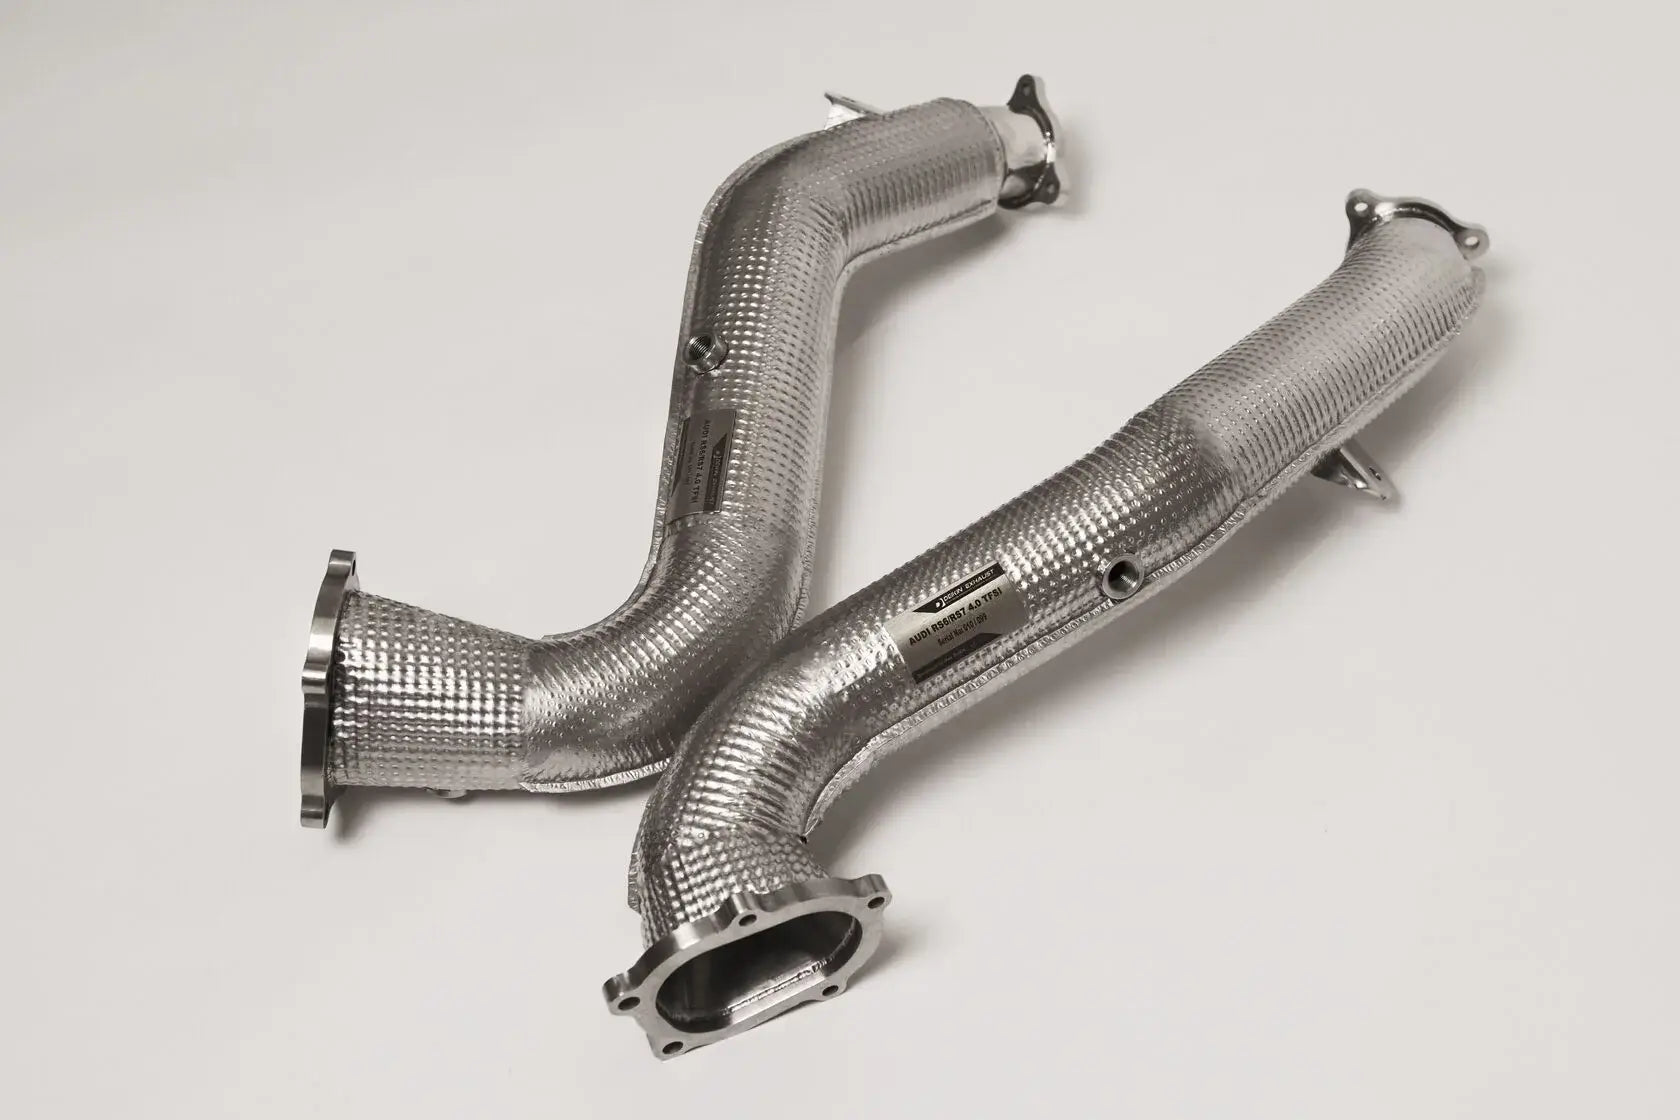 DEIKIN 10-AUDI.RS6.C7-DPT Downpipe for AUDI RS6 (C7) with thermal insulation HeatShield Photo-2 